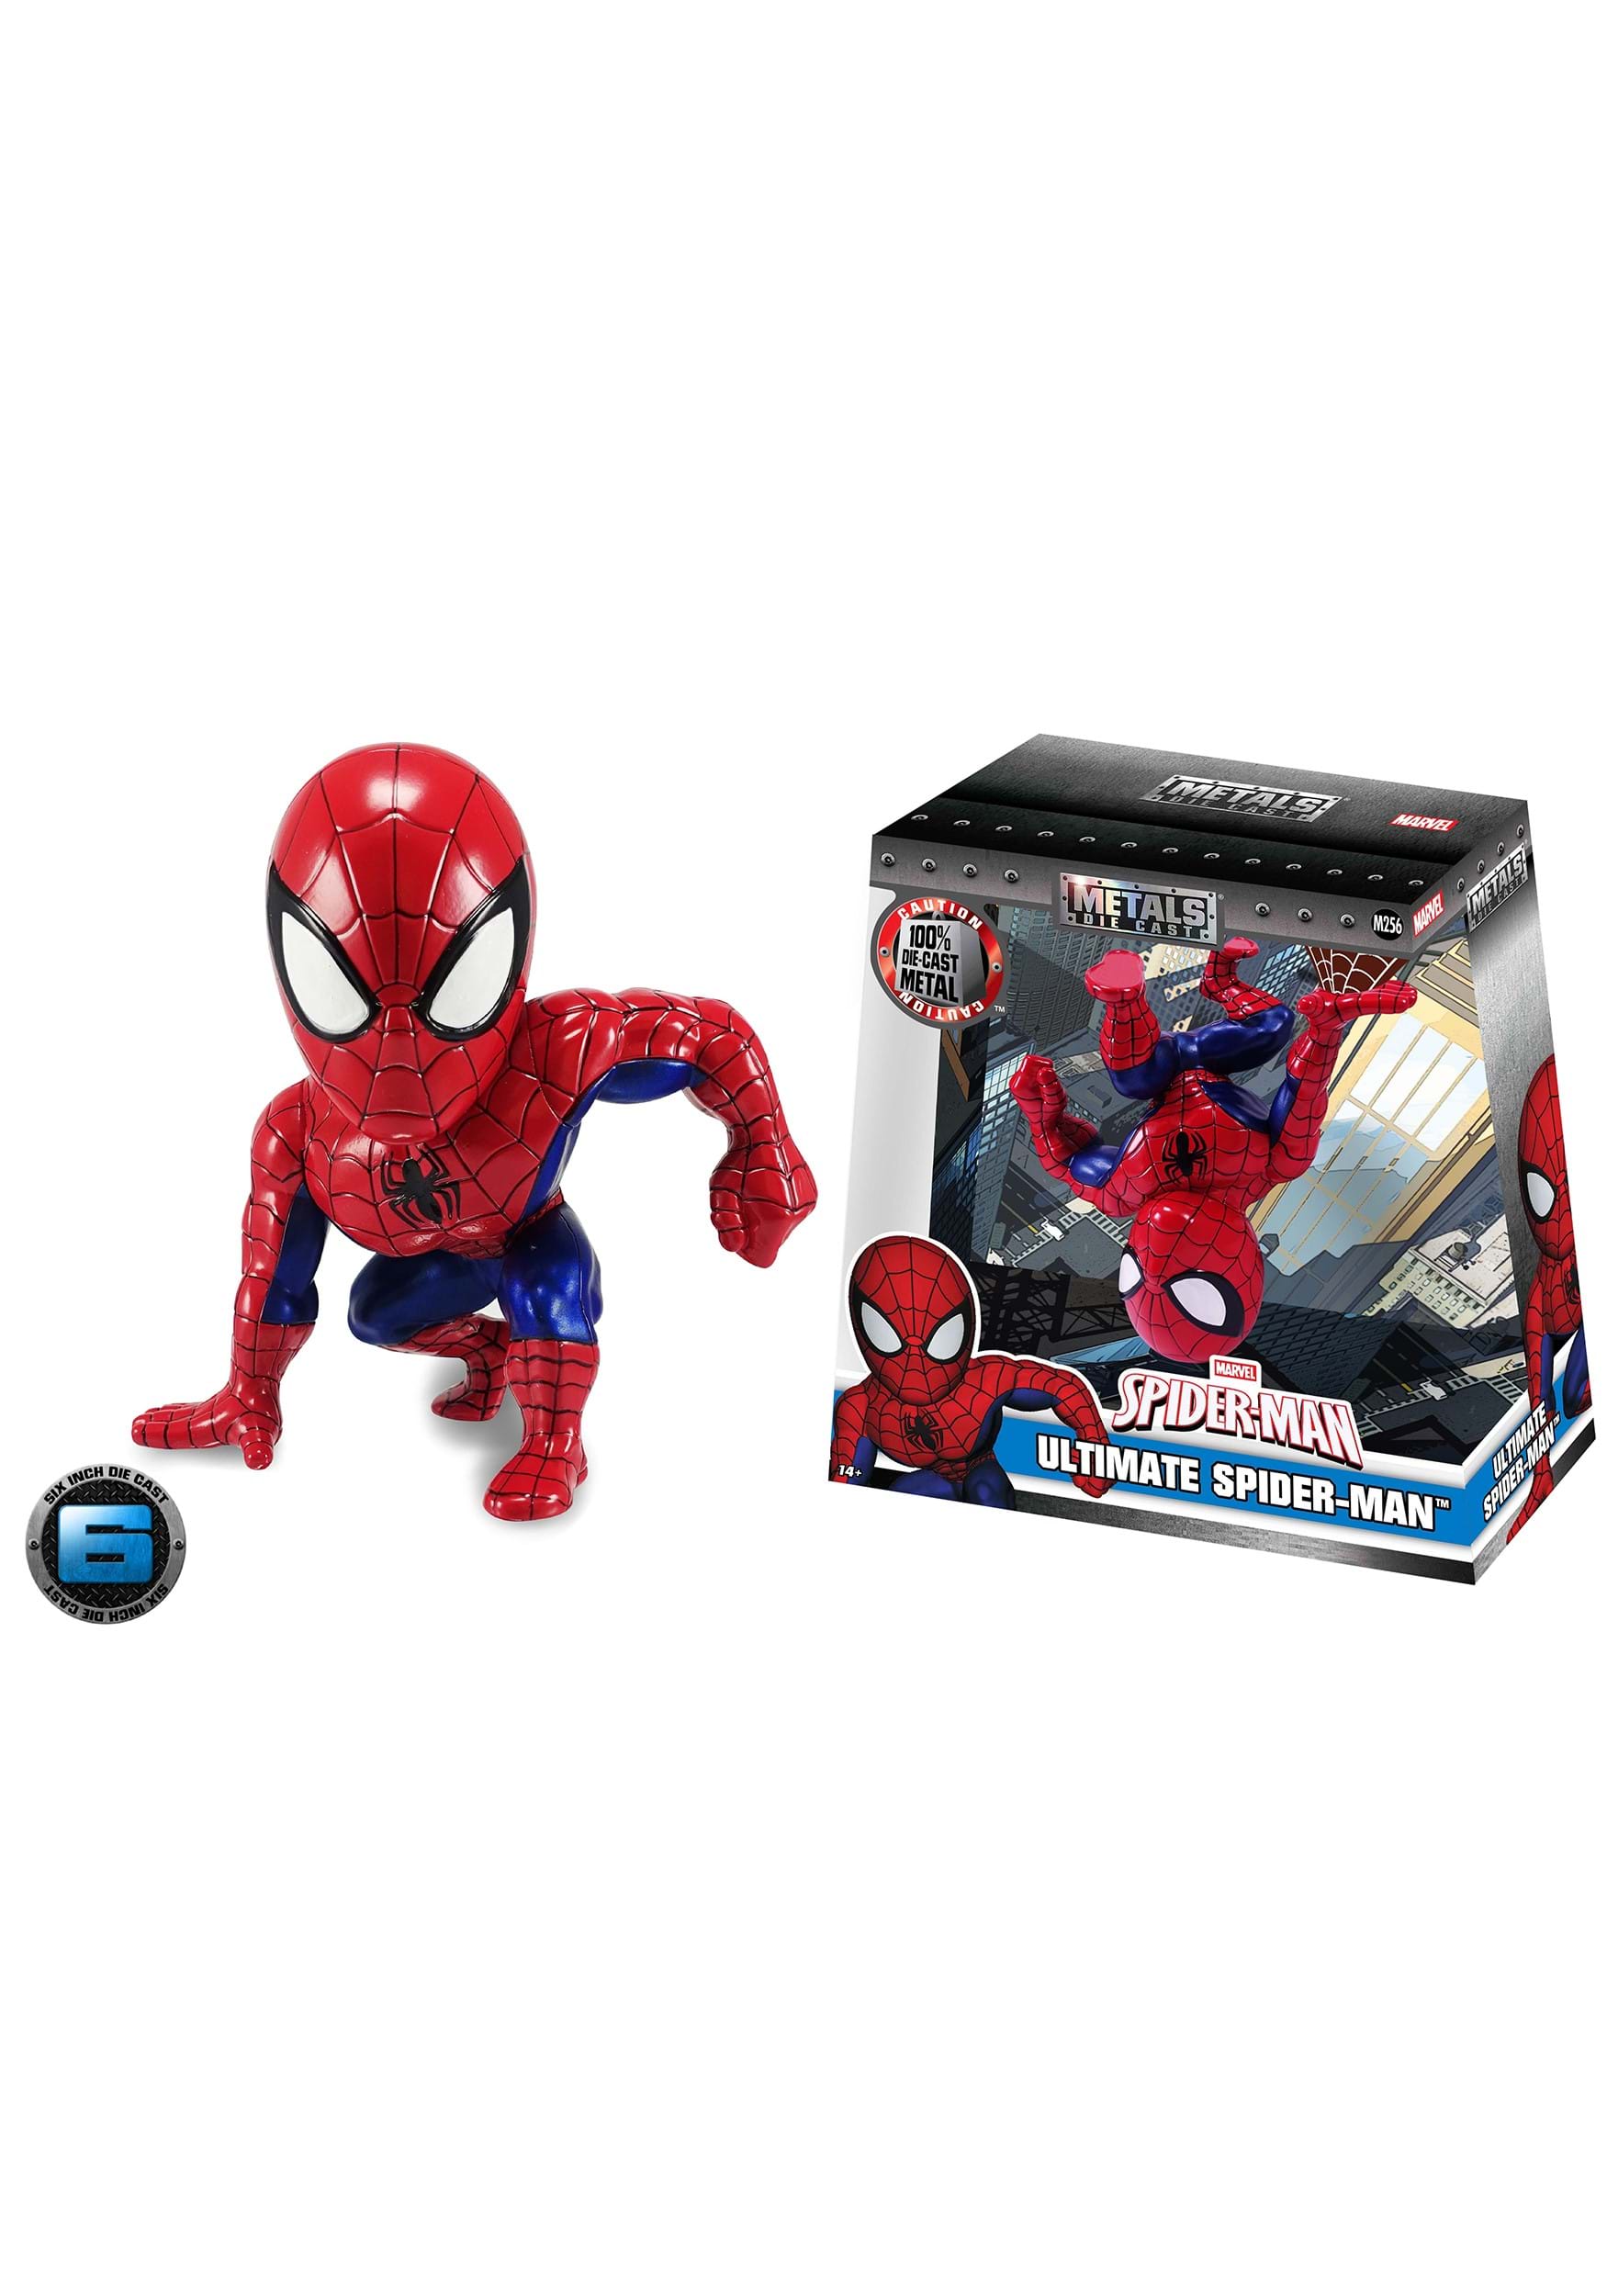 6 Inch Metals Ultimate Marvel Spider-Man Figure | Spiderman Gifts